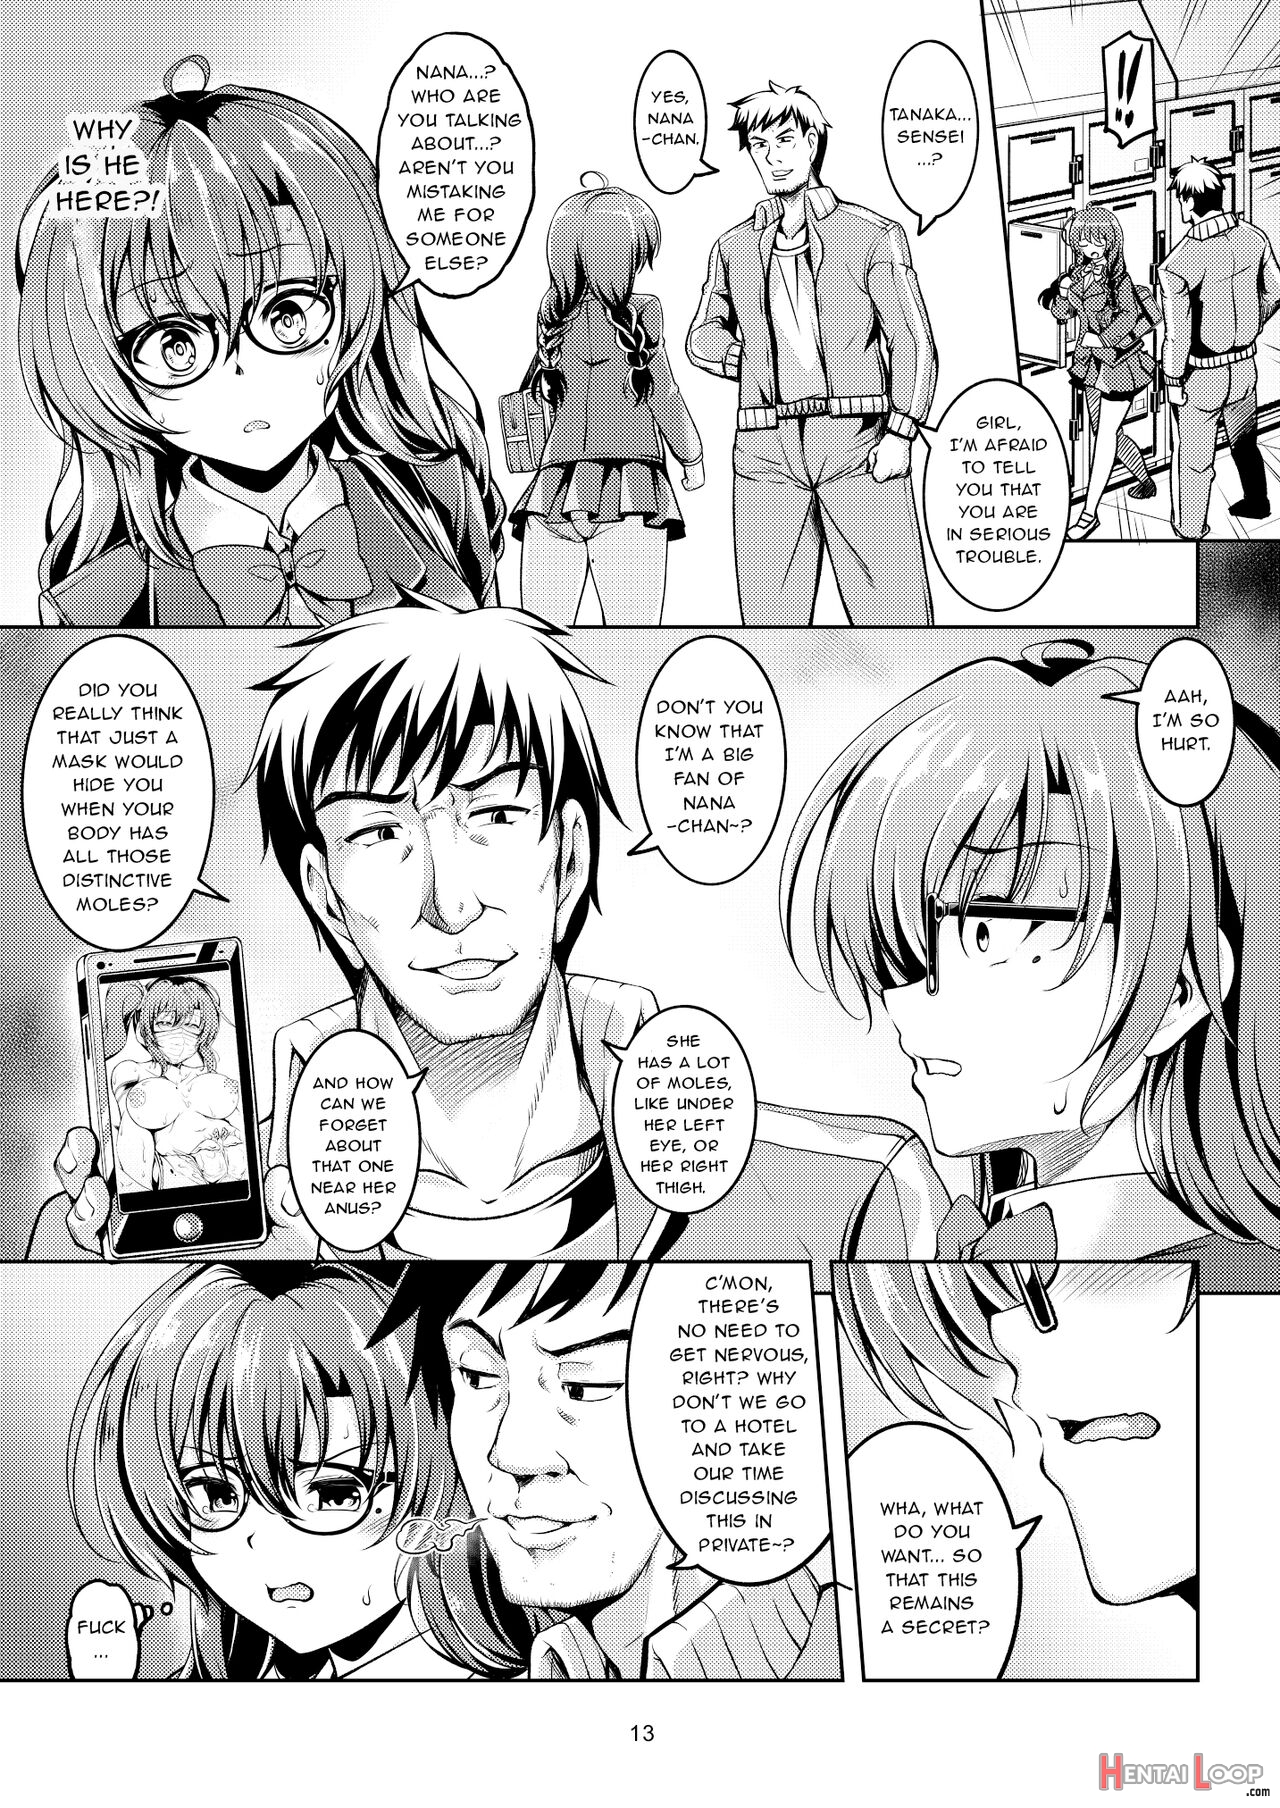 Darkside Streamer Take 1 Blackmail! The Fall Of The Anal Maniac Student Council President -yukino Kanami- page 17